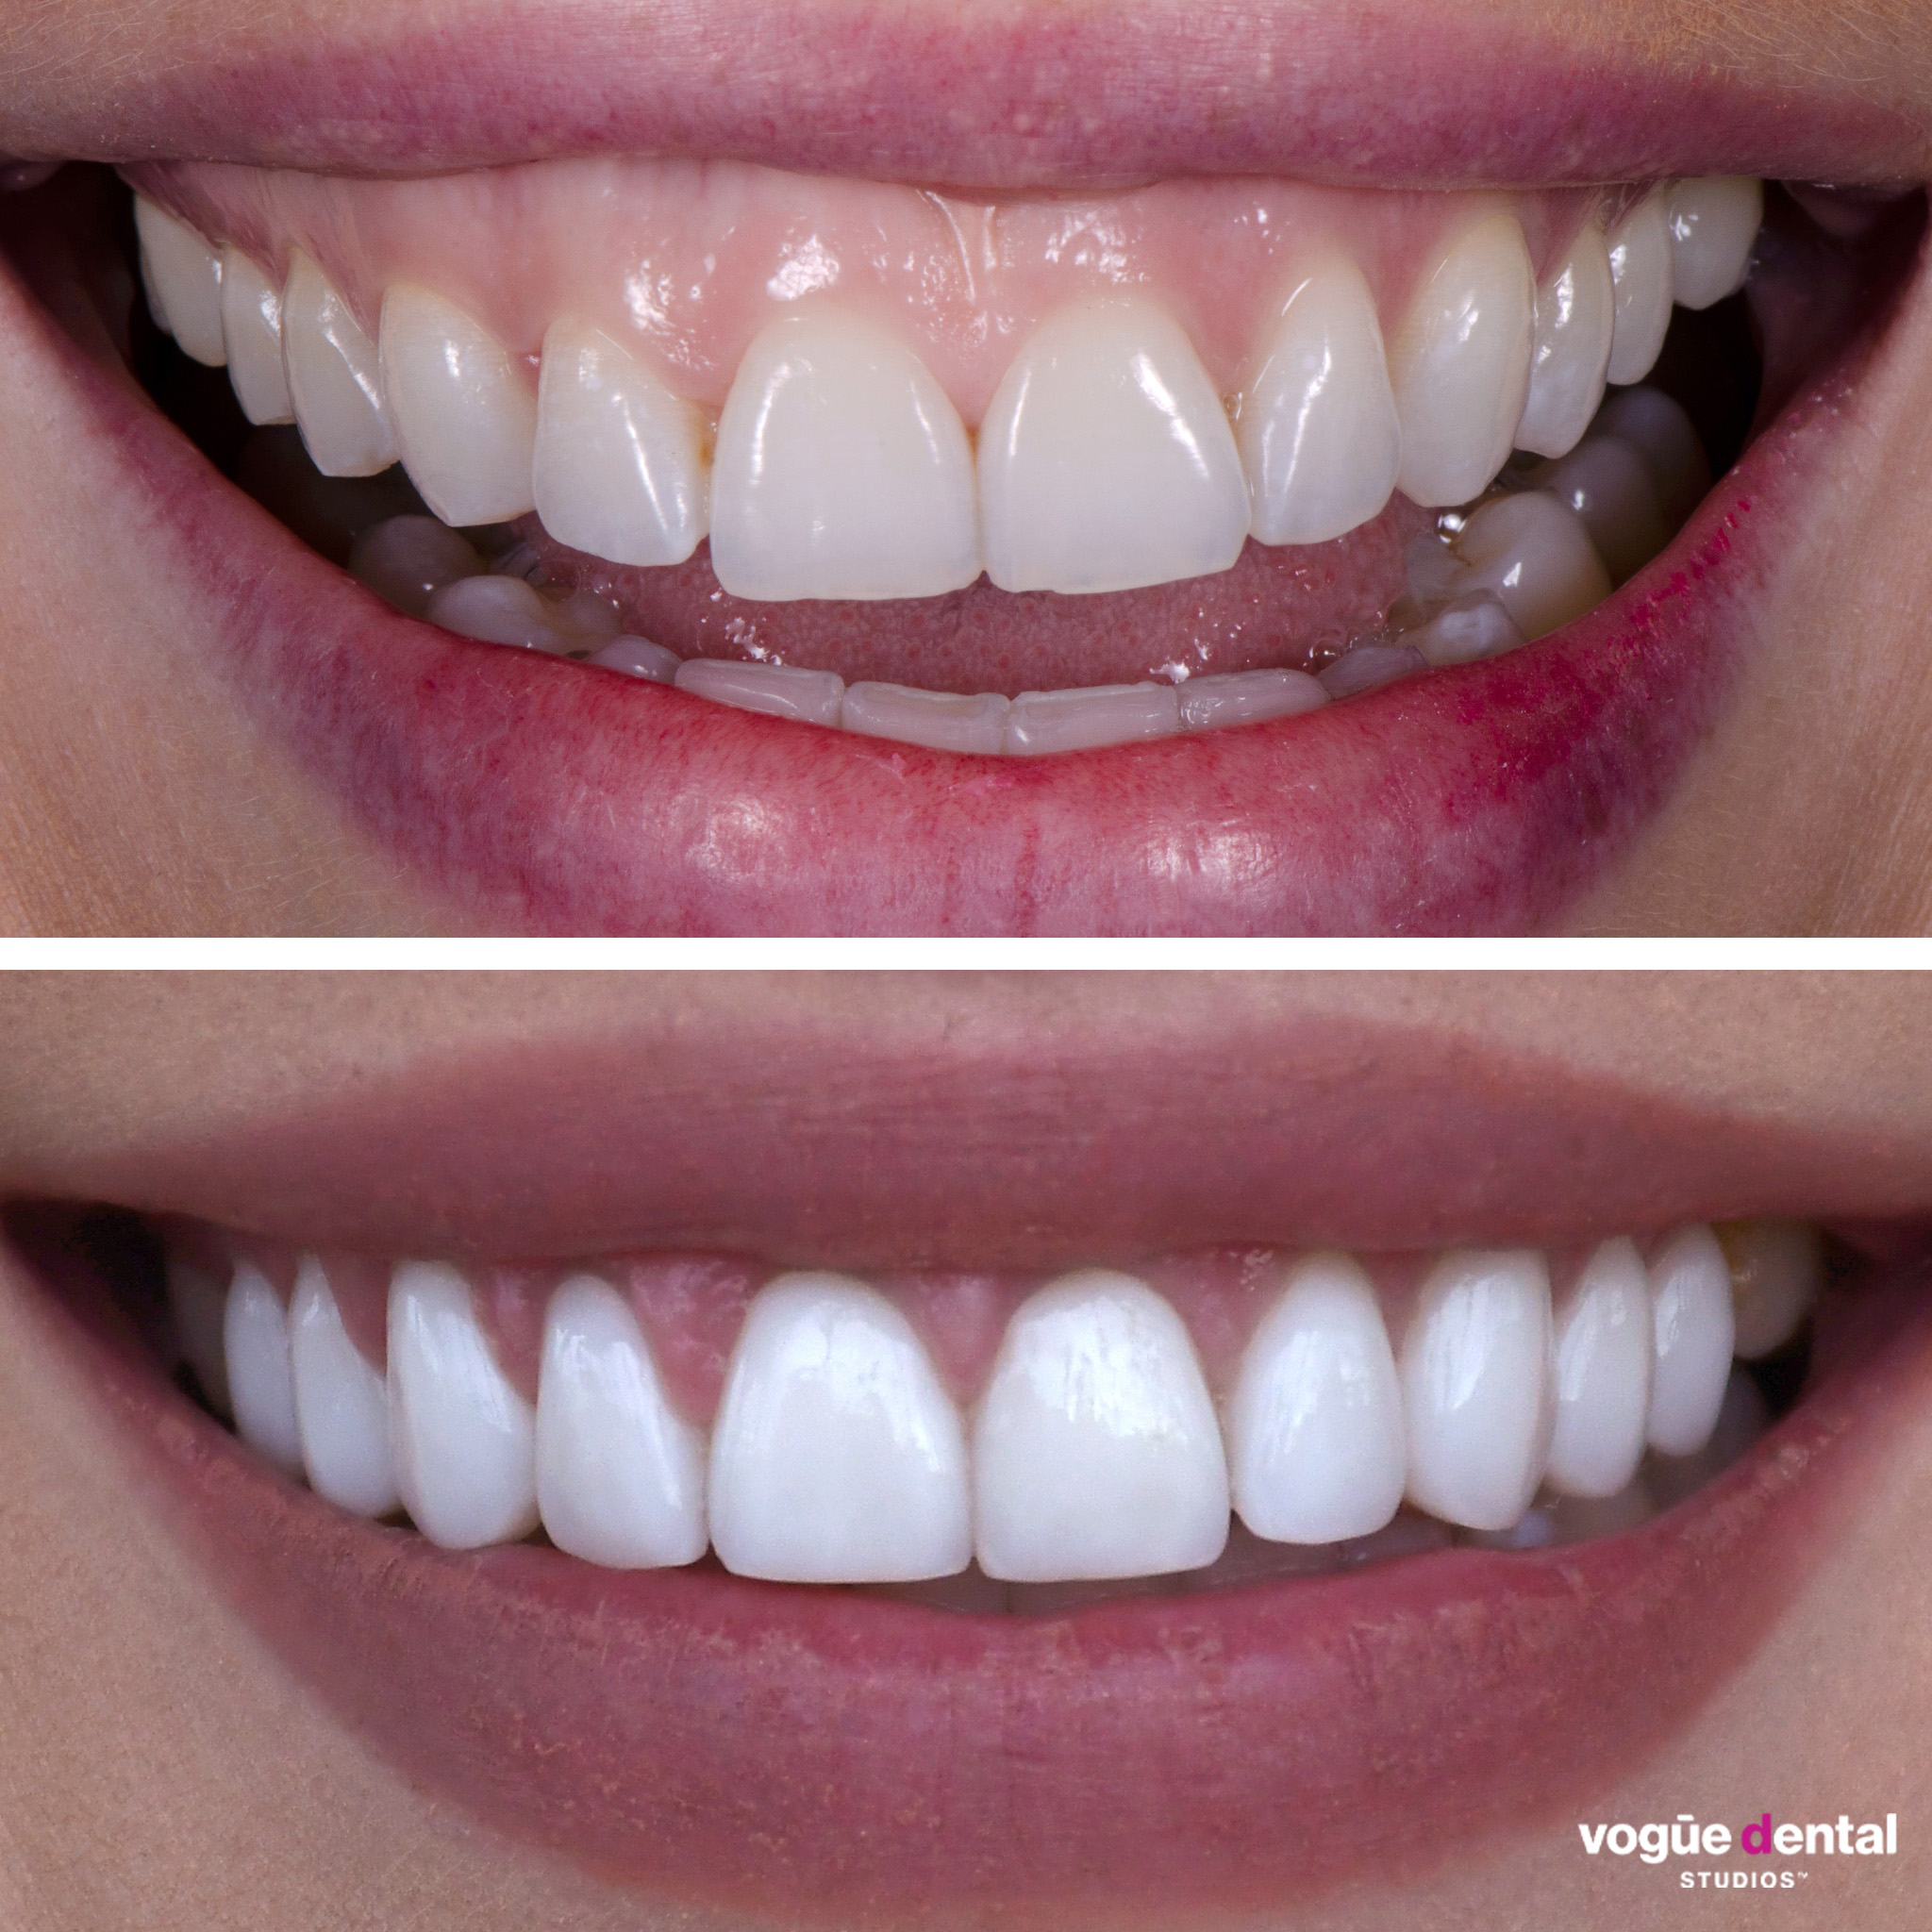 Before and after gummy smile and smile cant correction with porcelain veneers at Vogue Dental Studios - front view Cassie.